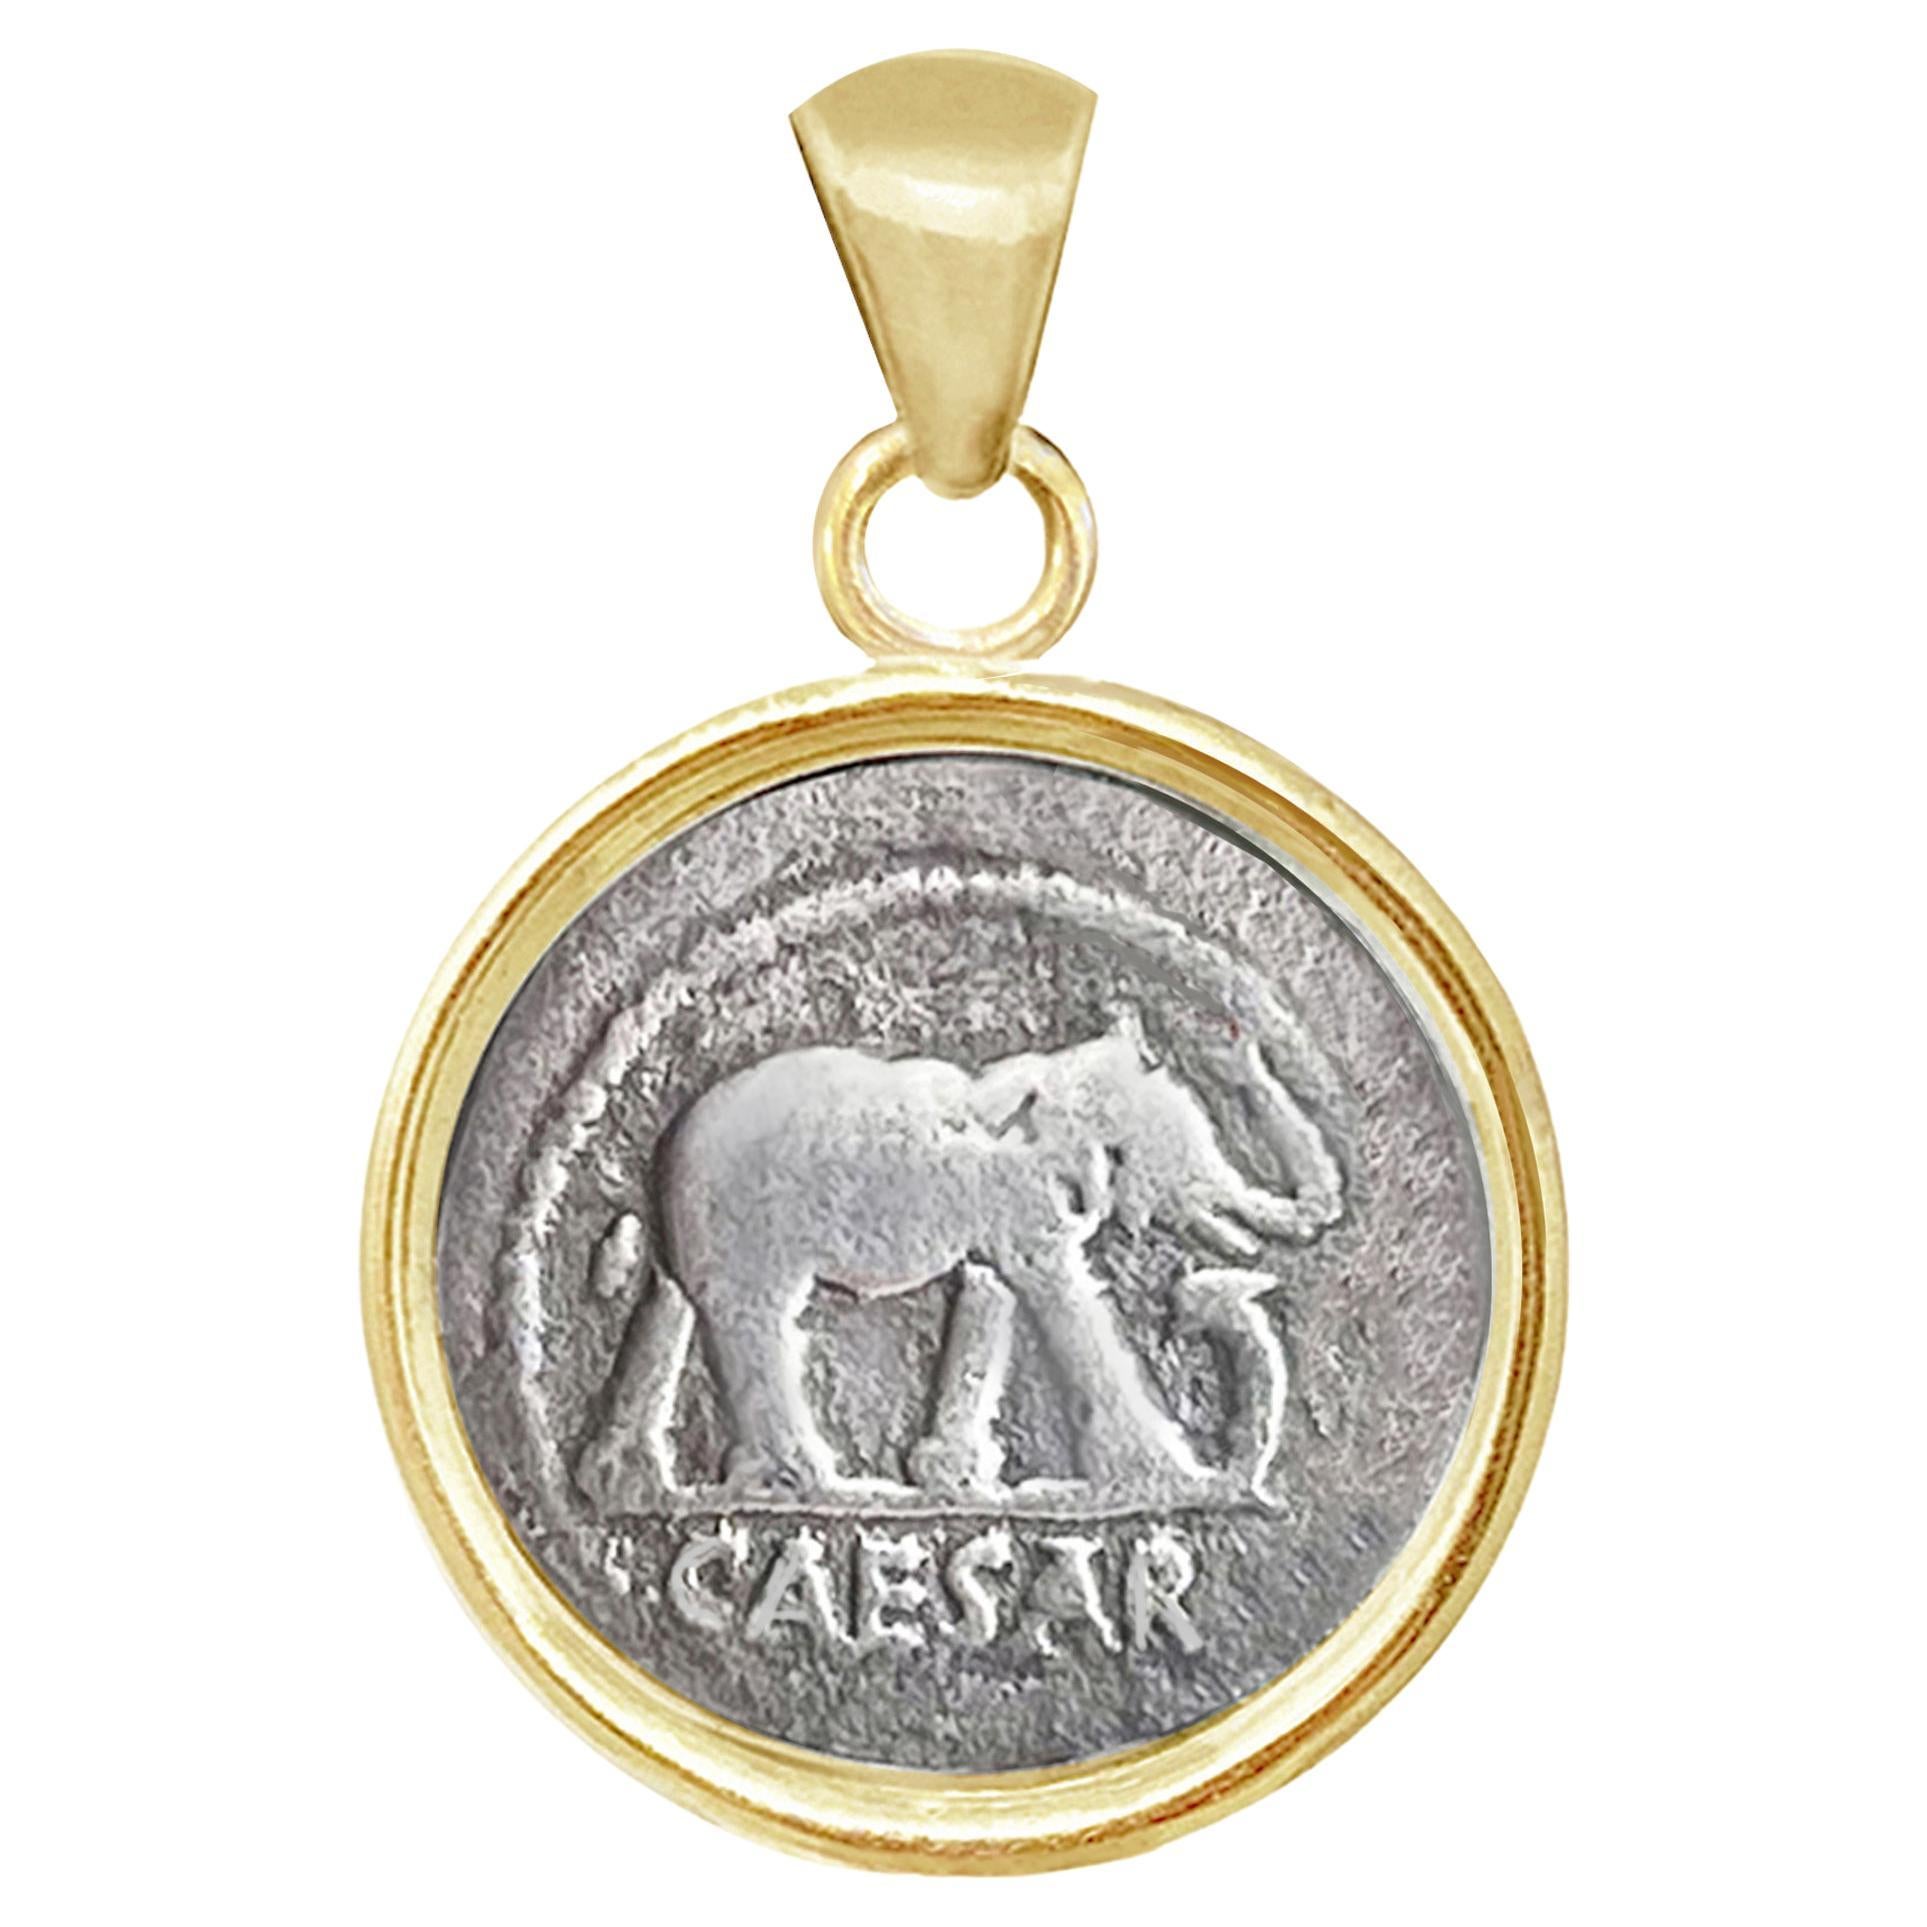 Set in this 18Kt gold pendant is an authentic Roman coin from 49 BC. C. which depicts an elephant that is trampling on a snake (symbol of Victory over evil). The coin was minted by the military mint that traveled with Julius Caesar in April 49 BC.